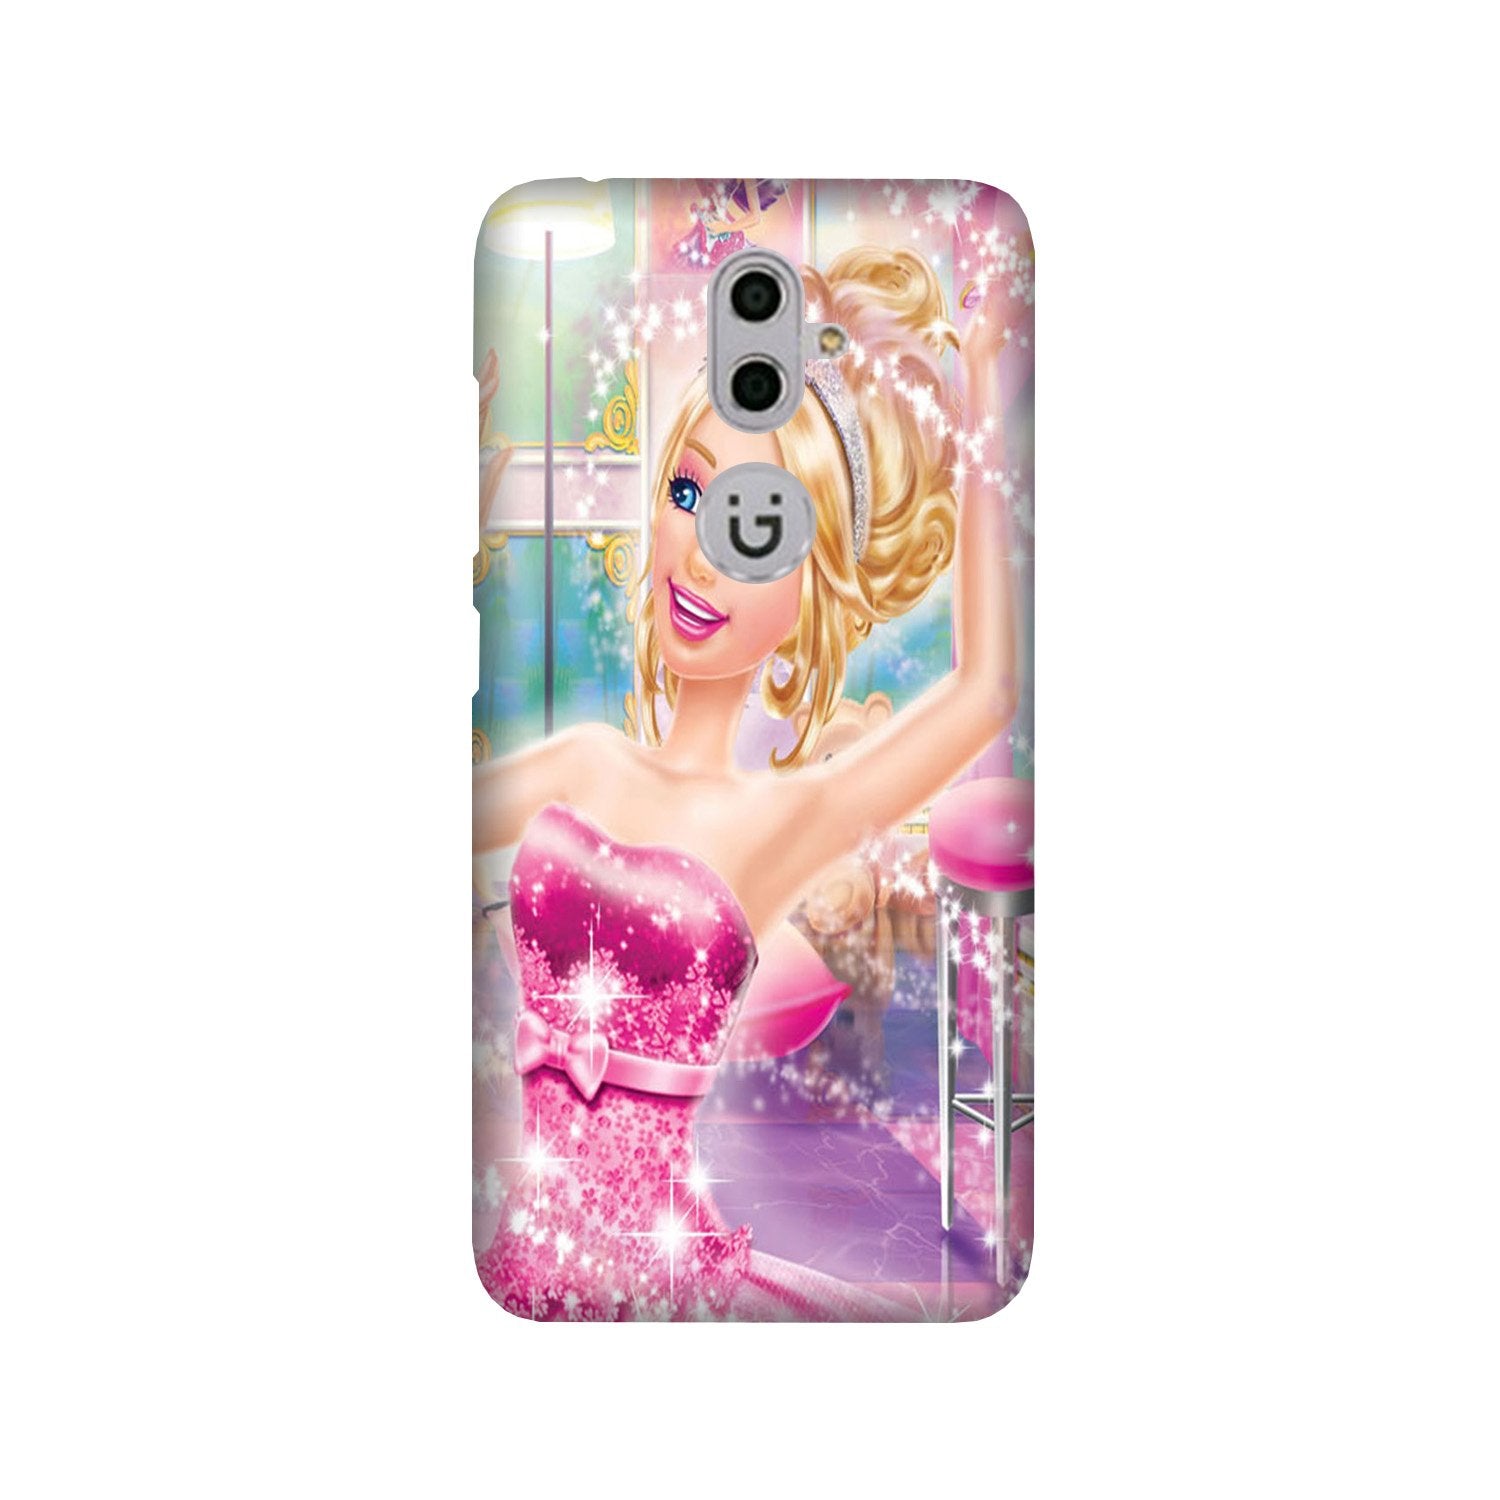 Princesses Case for Gionee S9